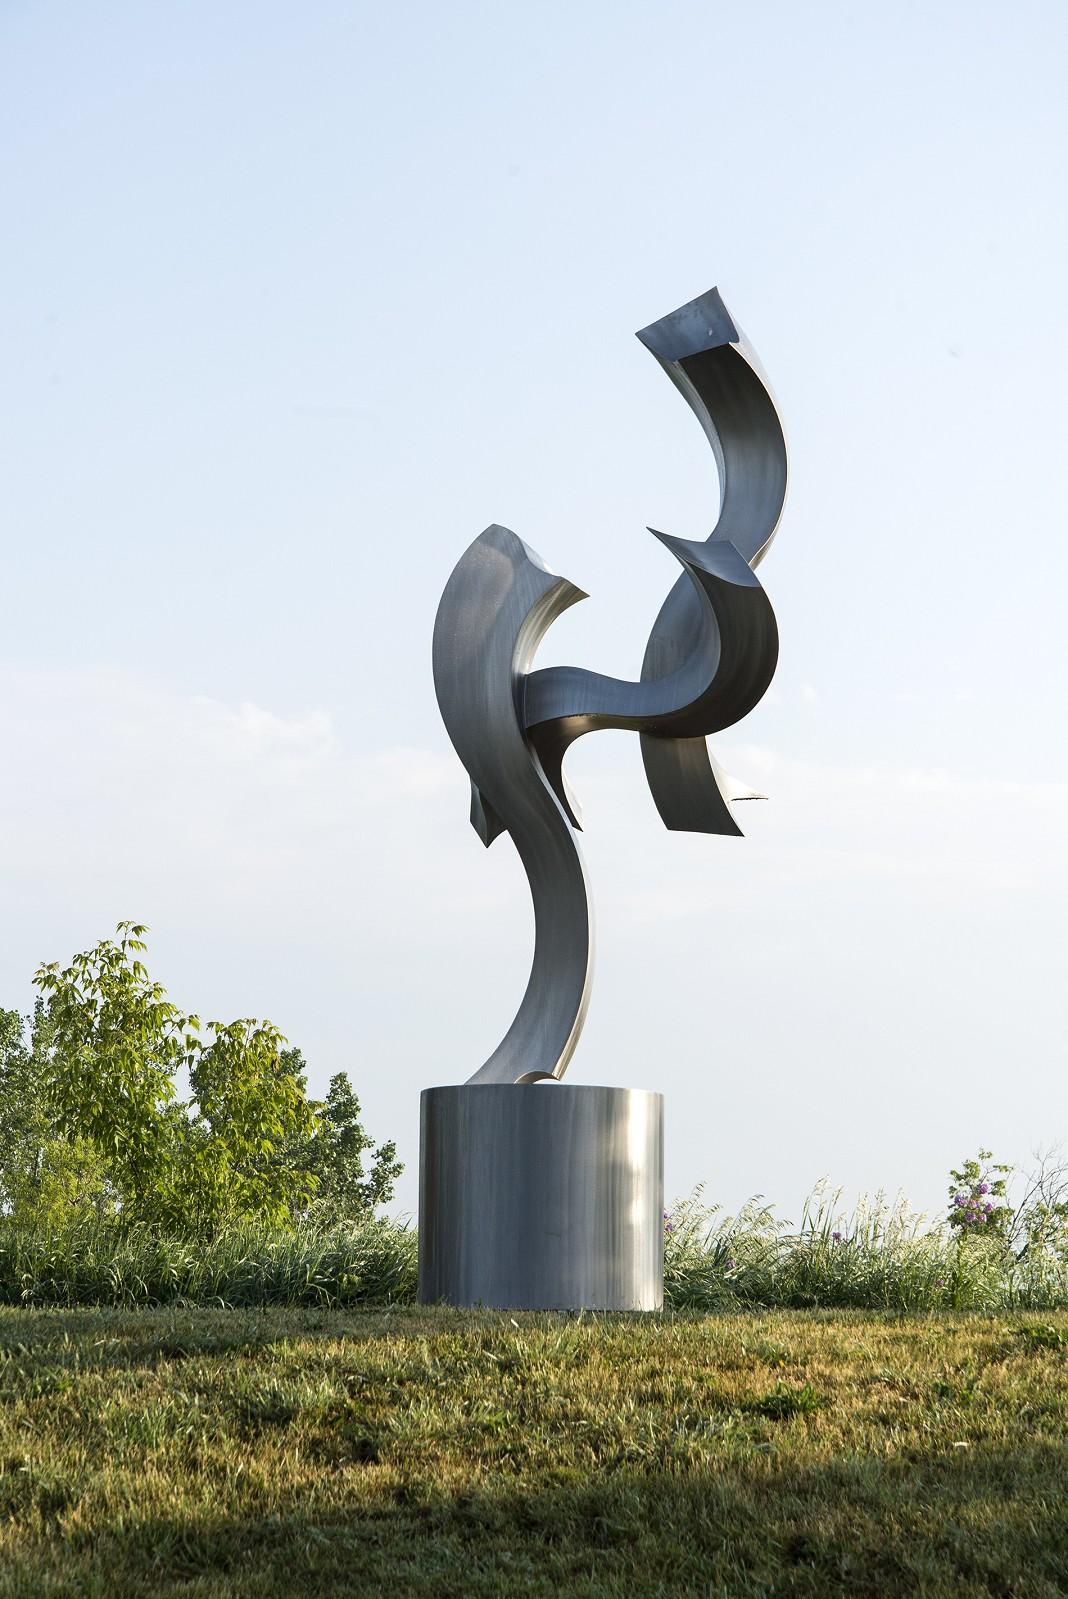 Soaring Embrace - rippling s-curved bands of stainless steel outdoor sculpture - Sculpture by Kevin Robb